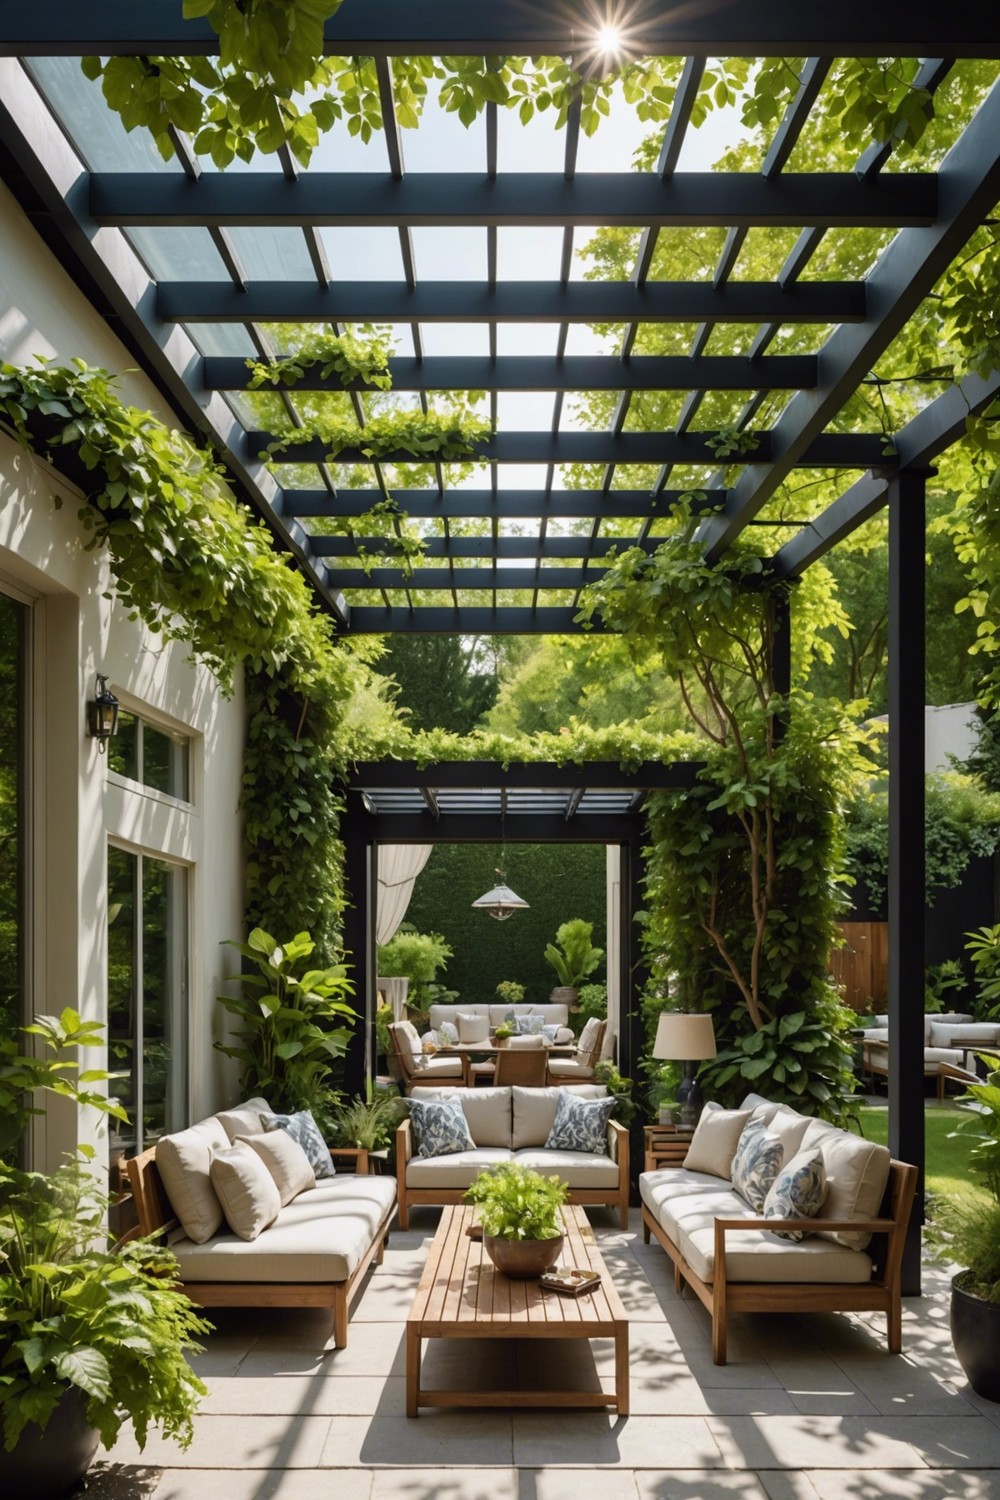 Pergola with Skylights for Natural Light